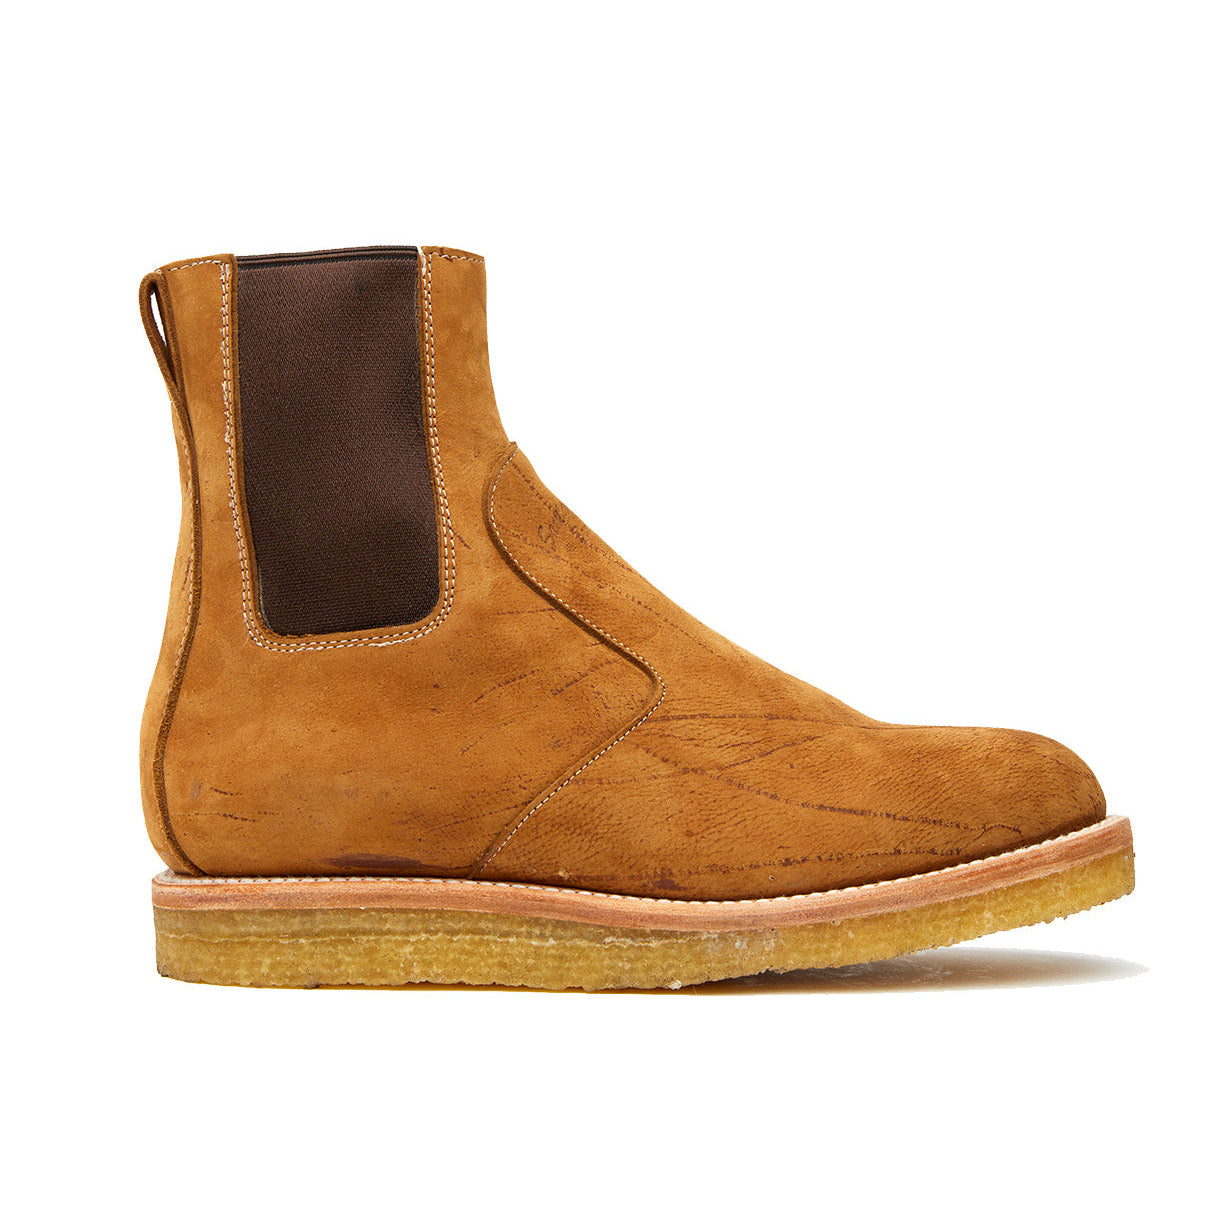 A single Santa Rosa Brand Stamford Boot in veg tan leather with elastic side panels and a natural crepe outsole.